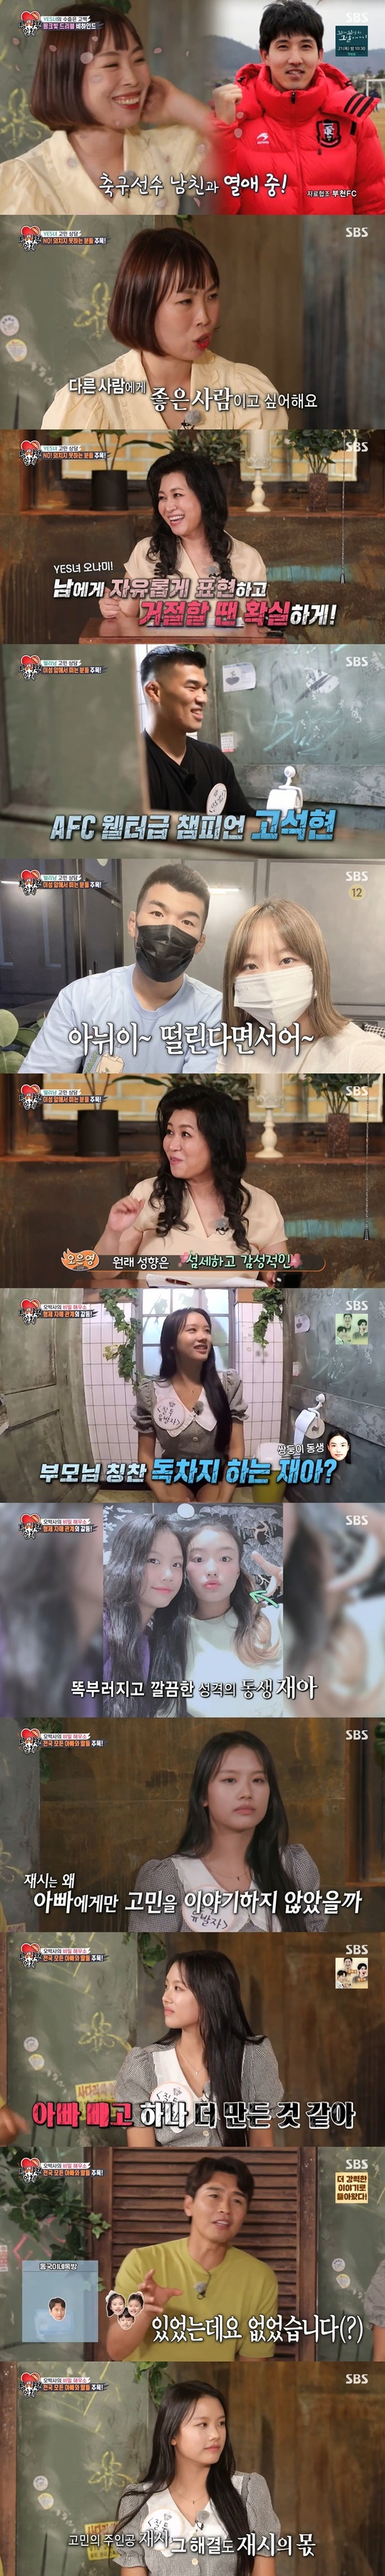 Lee Dong-gooks eldest daughter, Jash, from a soccer player, spoke out about her jealousy of her twin brother, Jae-ah.On SBS All The Butlers broadcast on October 17, Oh Eun Young Doctorate, a psychiatrist, released How to Get along with others, the core of human relations.On this day, Oh Eun Young Doctorate opened a secret Haewooso: Oh Eun Young Doctorate said, Im trying to solve the constipation of my mind today as a teacher.I am going to study how to get along with others. The first guest was a woman in her 30s who started dating in 13 years. In fact, I can not refuse because I am a YES disease.If someone asks me, I will listen to the request. Someone said that I have a good child complex.The identity of the story was Oh Nami, who recently started public devotion with Park Min, a soccer player.Oh Nami responded by saying he was stupid about the cause of his YES disease, with Oh Eun Young Doctorate saying: Mr Nami wants to be a good person for others.So I am trying to show a good picture, he said. I should have pride in myself that trust will continue even if I do not pay. Also, Oh Eun Young Doctorate added: Dont be afraid of normal regression (to get the calm and comfort of your mind from a very close relationship with regression).The second guest was a 29-year-old man, who was four months old.The guest said, If you have a heart or not, your heart is pounding in front of the women, your hands are sweating, your head is white.The identity of the guest was AFC welterweight champion Ko Seok-hyun.Ko Seok-hyun said, I met a woman friend of fate three years ago. I want to have a deep conversation with a woman friend and have a skinny, but it is not good.Oh Eun Young Doctorate said, Ko Seok-hyun is good in physique and physically masculine, but his original tendency is delicate and emotional. The experience of being rejected by reason in the past has been felt by shame.Small shame felt like a huge shame, and it has been an anxiety response since then. Oh Eun Young Doctorate advised, Tell me honestly that you are trembling when you are trembling.The third guest was a 15-year-old middle school student from Incheon, who said, I am worried about being jealous of my best friend. My best friend is actually my twin sister.I feel so much competition for that Friend, said the guests identity was the eldest daughter Jash of Lee Dong-gook, a former footballer.Jasie appeared with Father Lee Dong-gook.Lee Dong-gook said, I have never thought that Jash would be jealous of Jaa. I was a little surprised to be honest. Jash does it in two days.But I turn up the Give as soon as possible. Jash said, I have told my mother this, but I have never told Father. Oh Eun Young Doctorate said, Jash is curious and I want to try something new.But at this age, it is enough. He said, I think that the Give up is fast for my parents.Jash is curious, so it is good to let him do this and that. Among them, Lee Dong-gook suspected, There is a family group chat room, but there is not much to go and go, but I made one more except Father. So Jashi said, Honestly.I have a mother and me and Jaea, and I usually talk there. Confessions shocked Father Lee Dong-gook.Oh Eun Young Doctorate nodded: Adolescence daughters need to have a conversation with their mom.